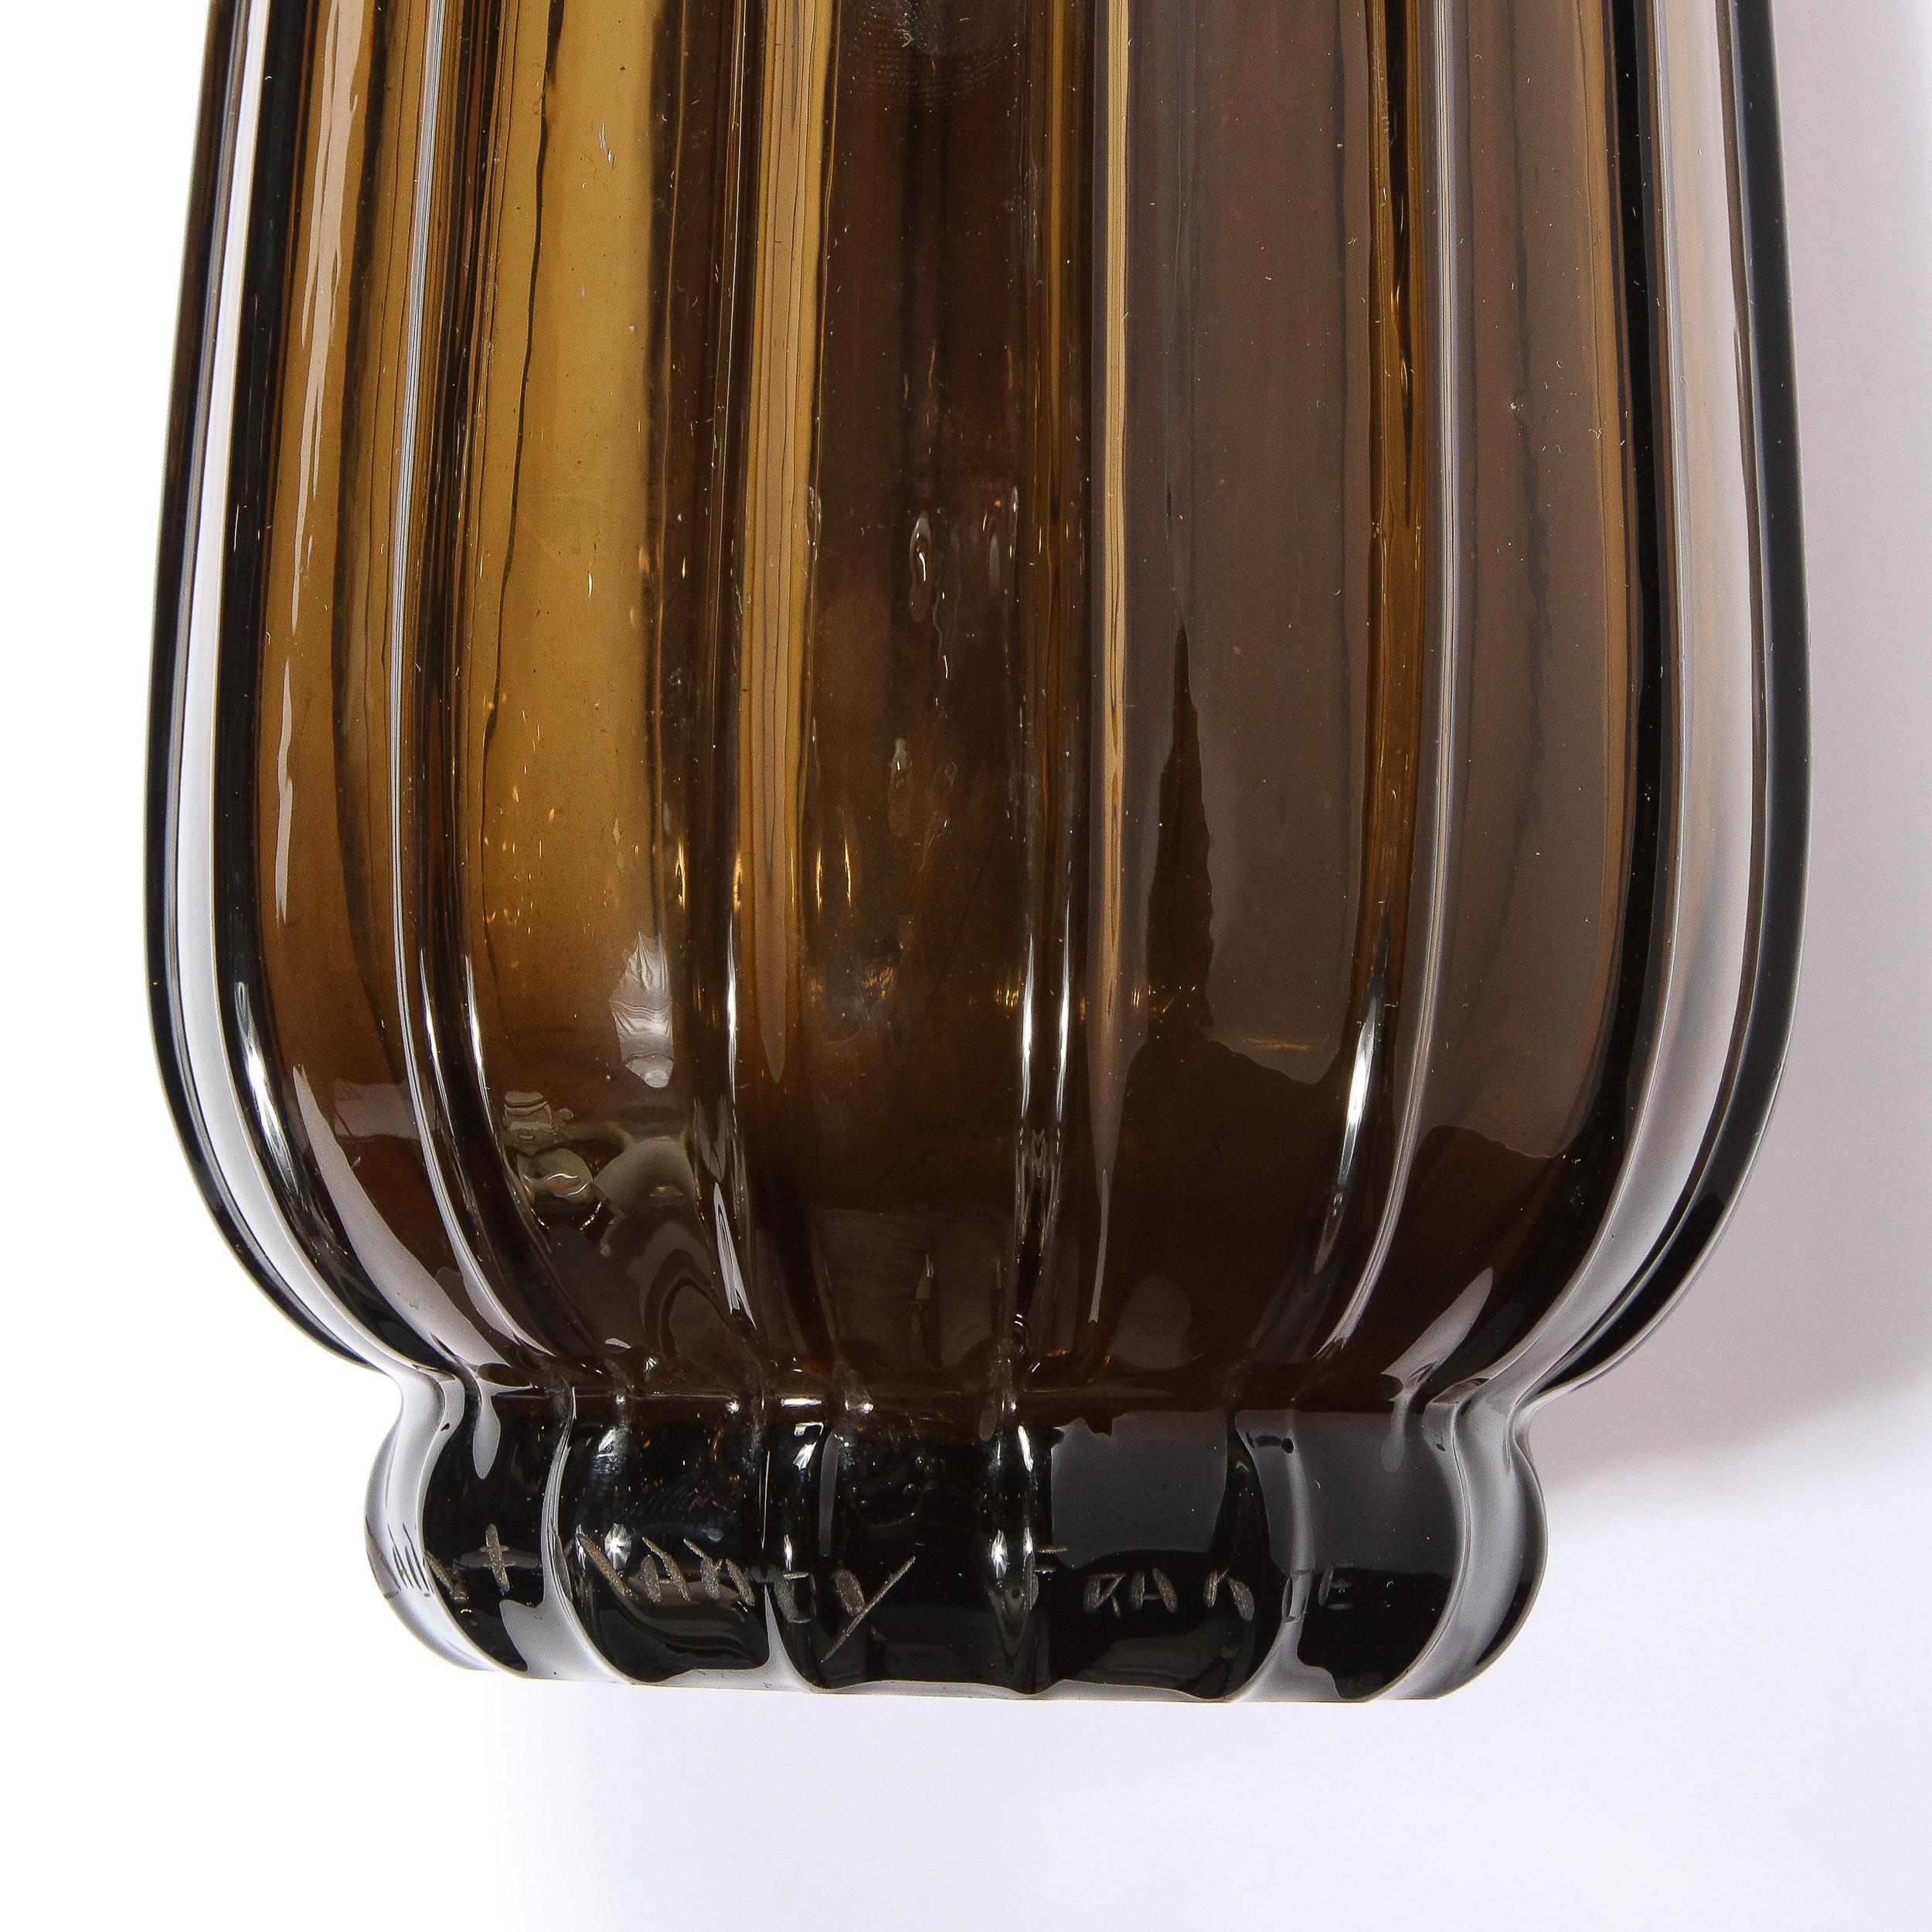 1930s Art Deco Topaz Colored Hand Blown Tall Vase, Signed by Daum Nancy France For Sale 4